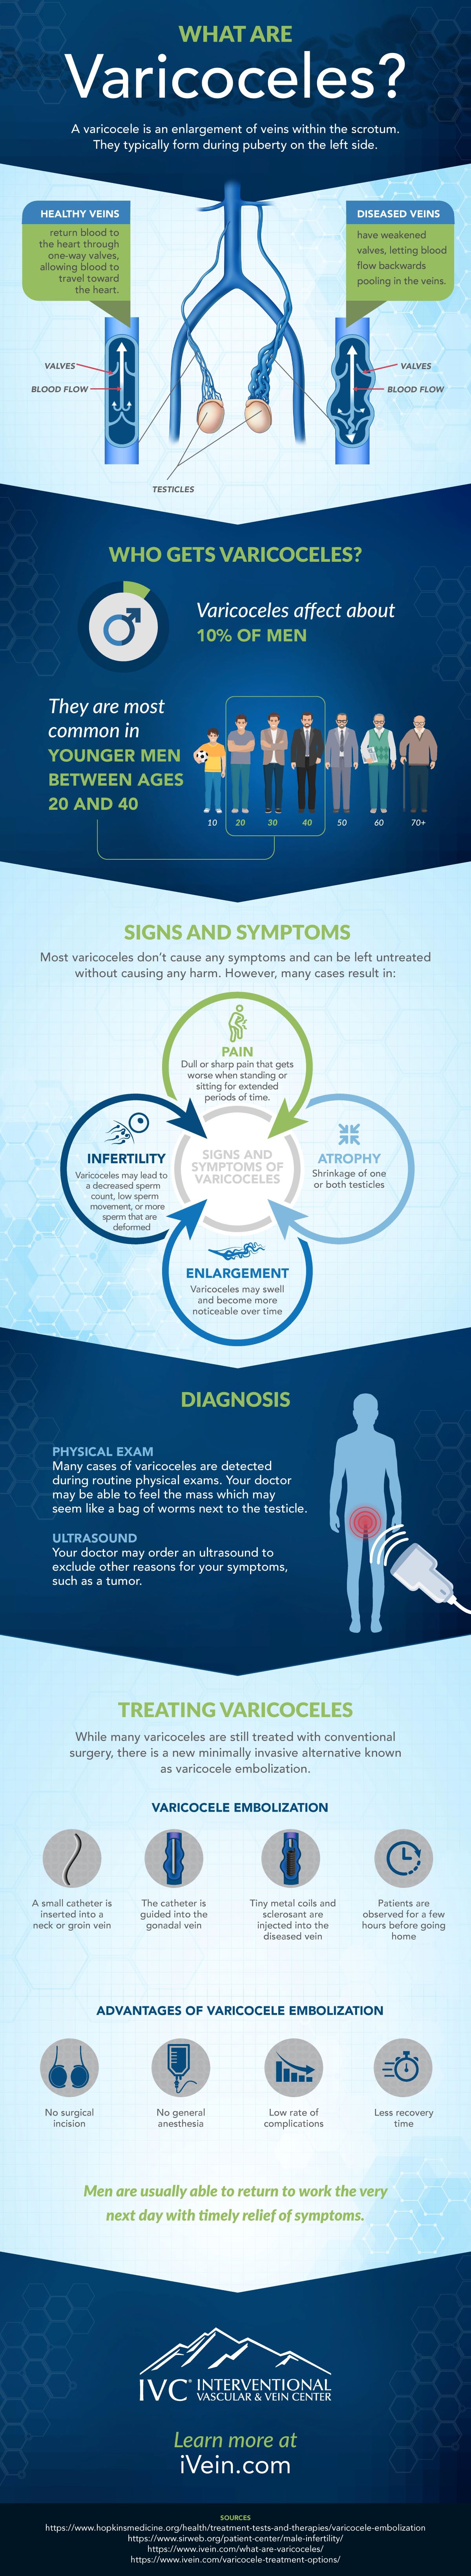 infographic describing the diagnosis and treatment of varicoceles